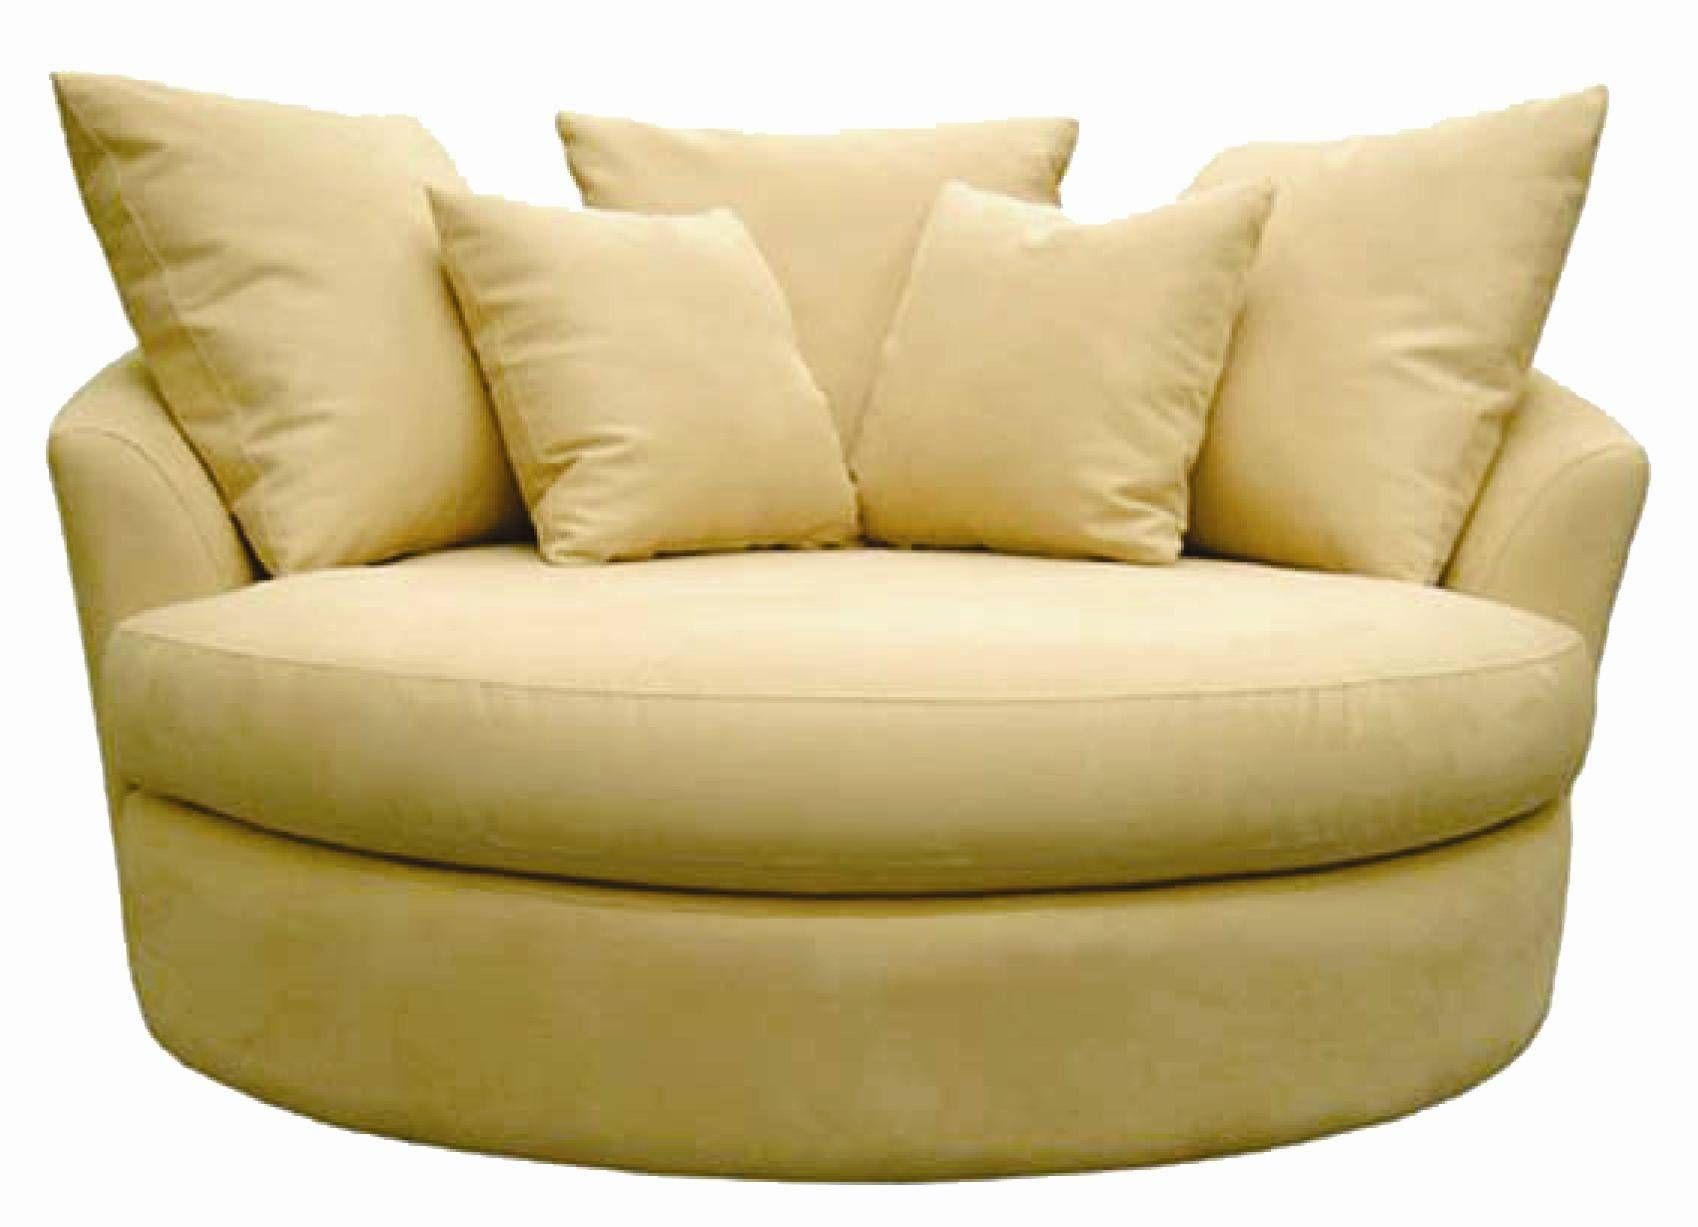 Round Sofa Chair Covers | Tehranmix Decoration Throughout Round Swivel Sofa Chairs (Photo 6 of 30)